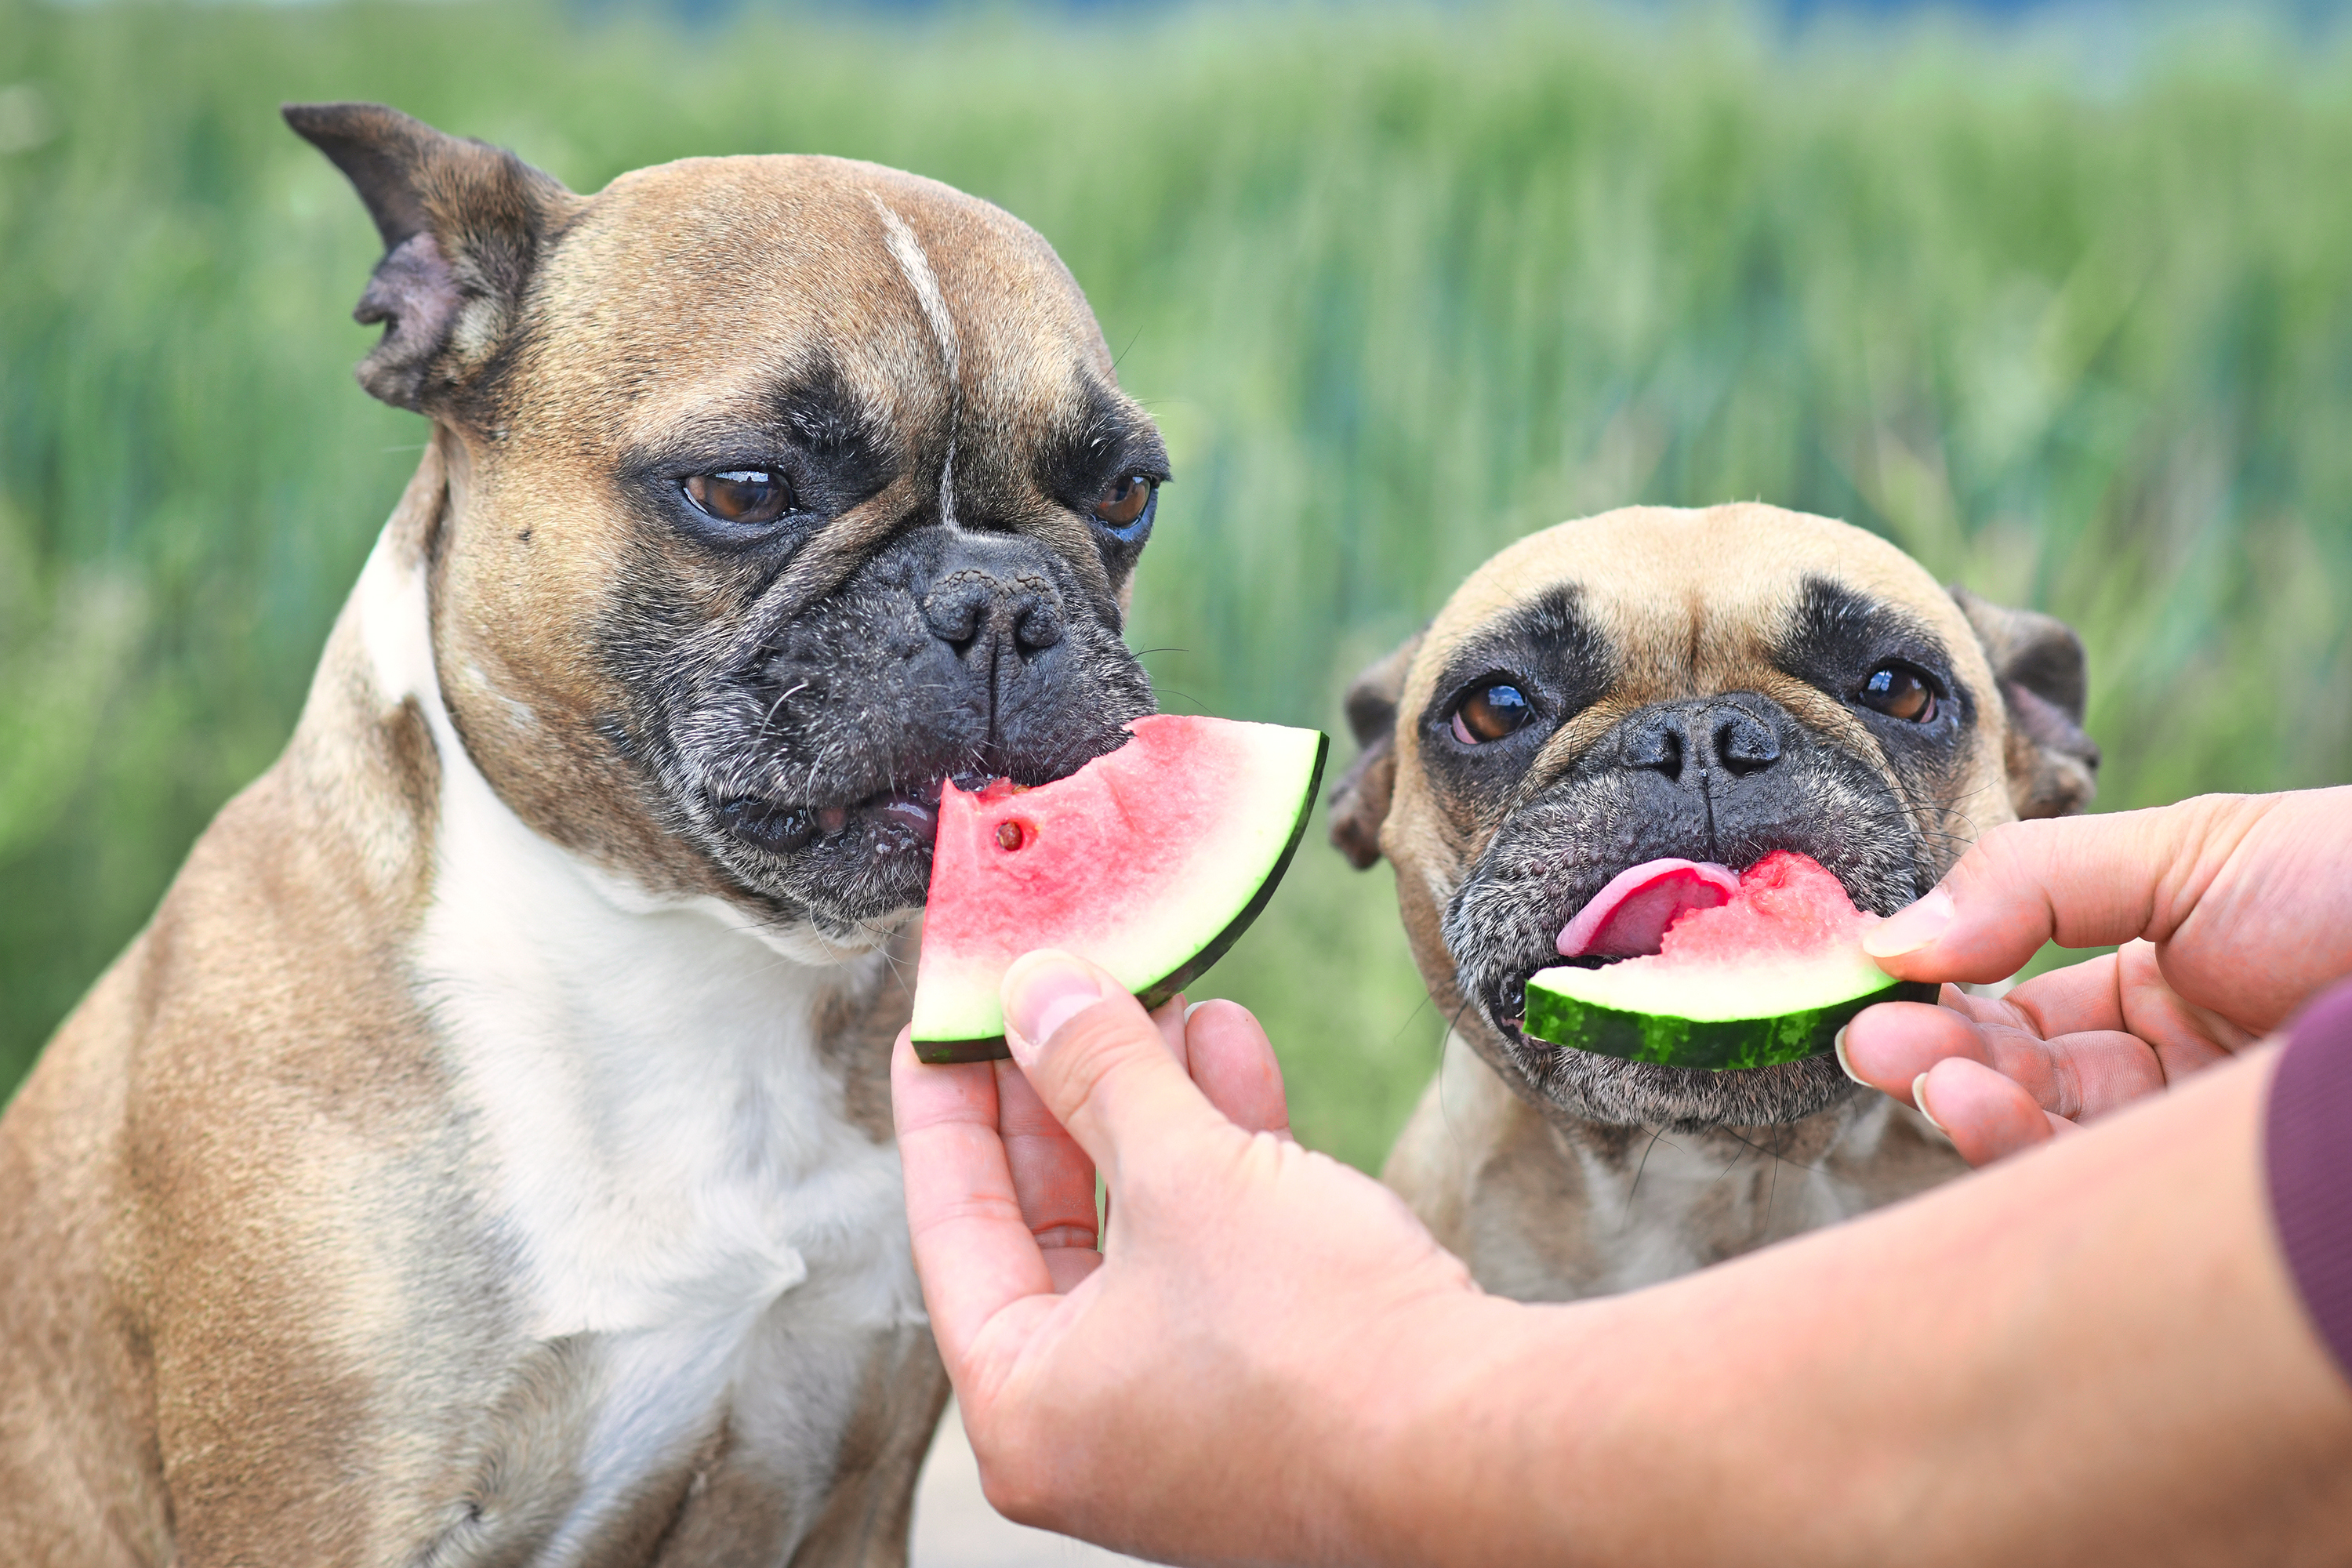 French Bulldog pair shares fresh watermelon slices with their human